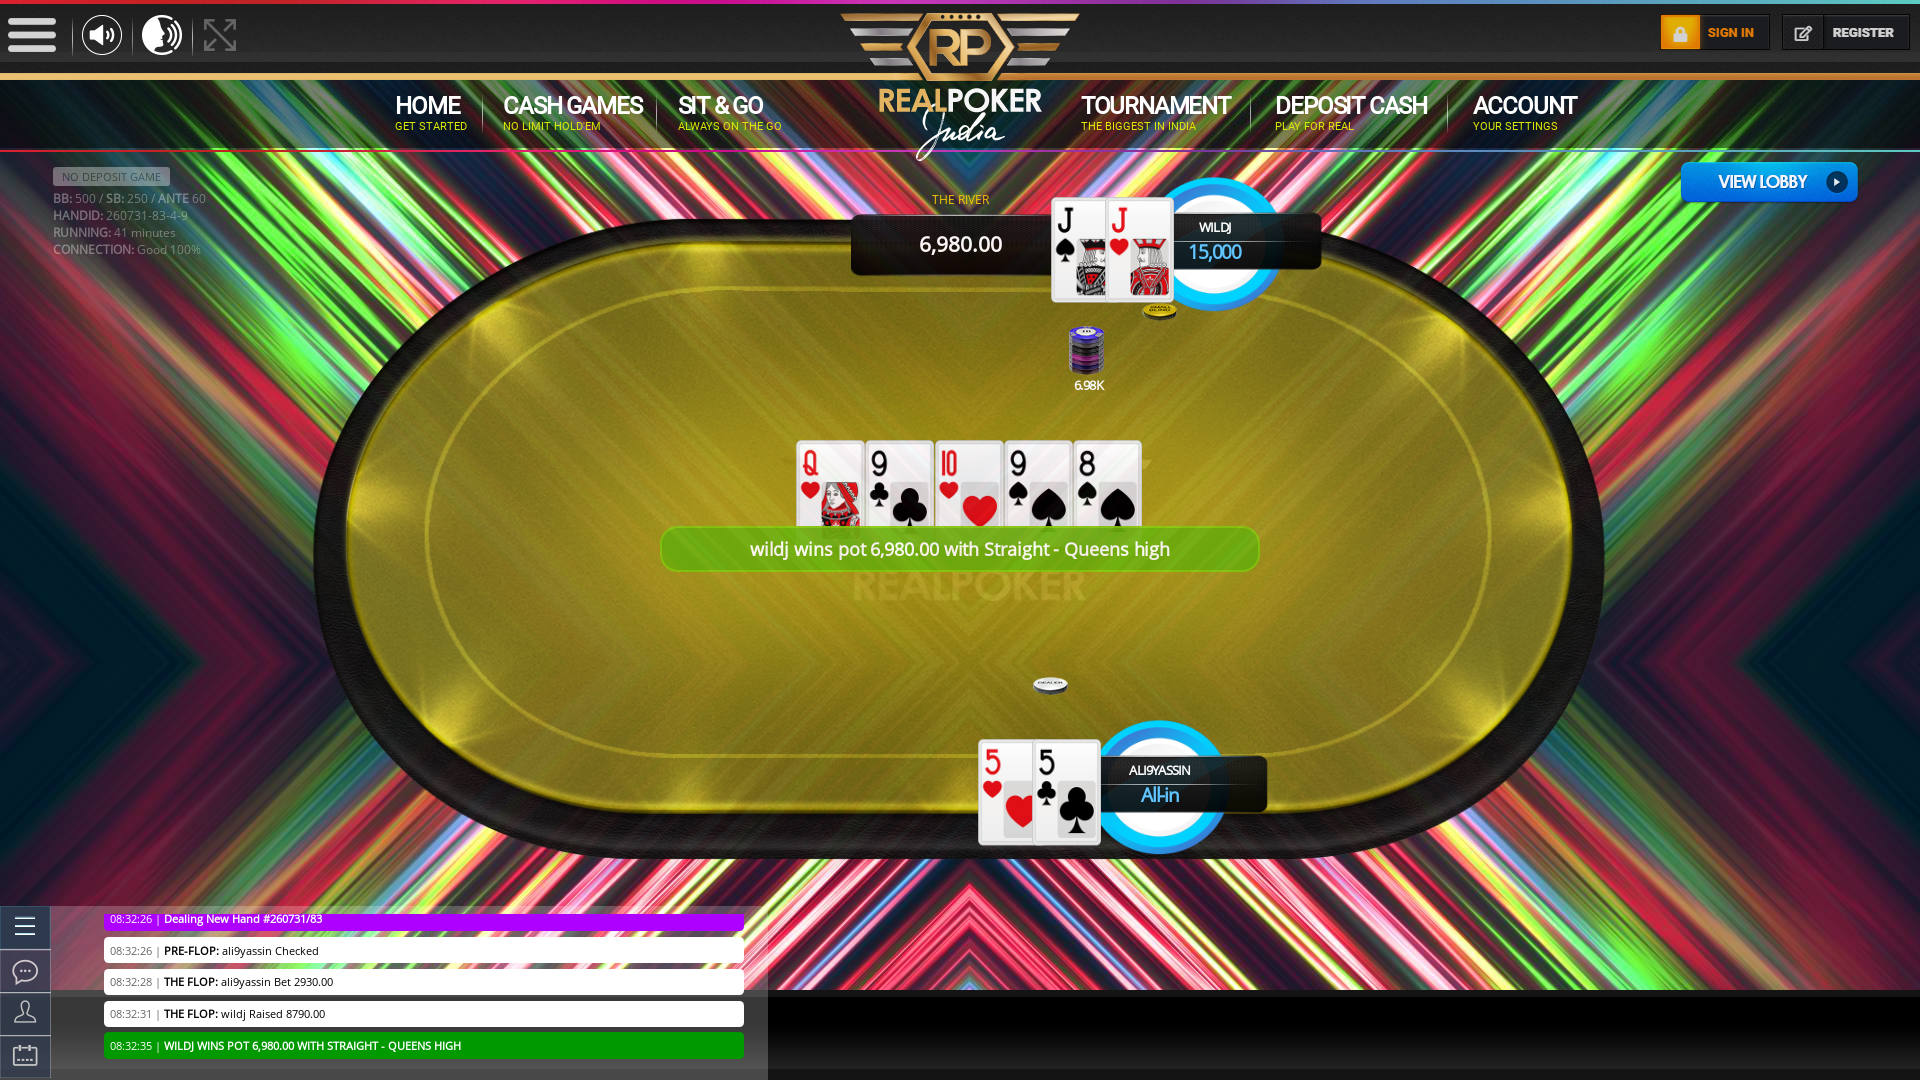 Indian poker on a 10 player table in the 41st minute